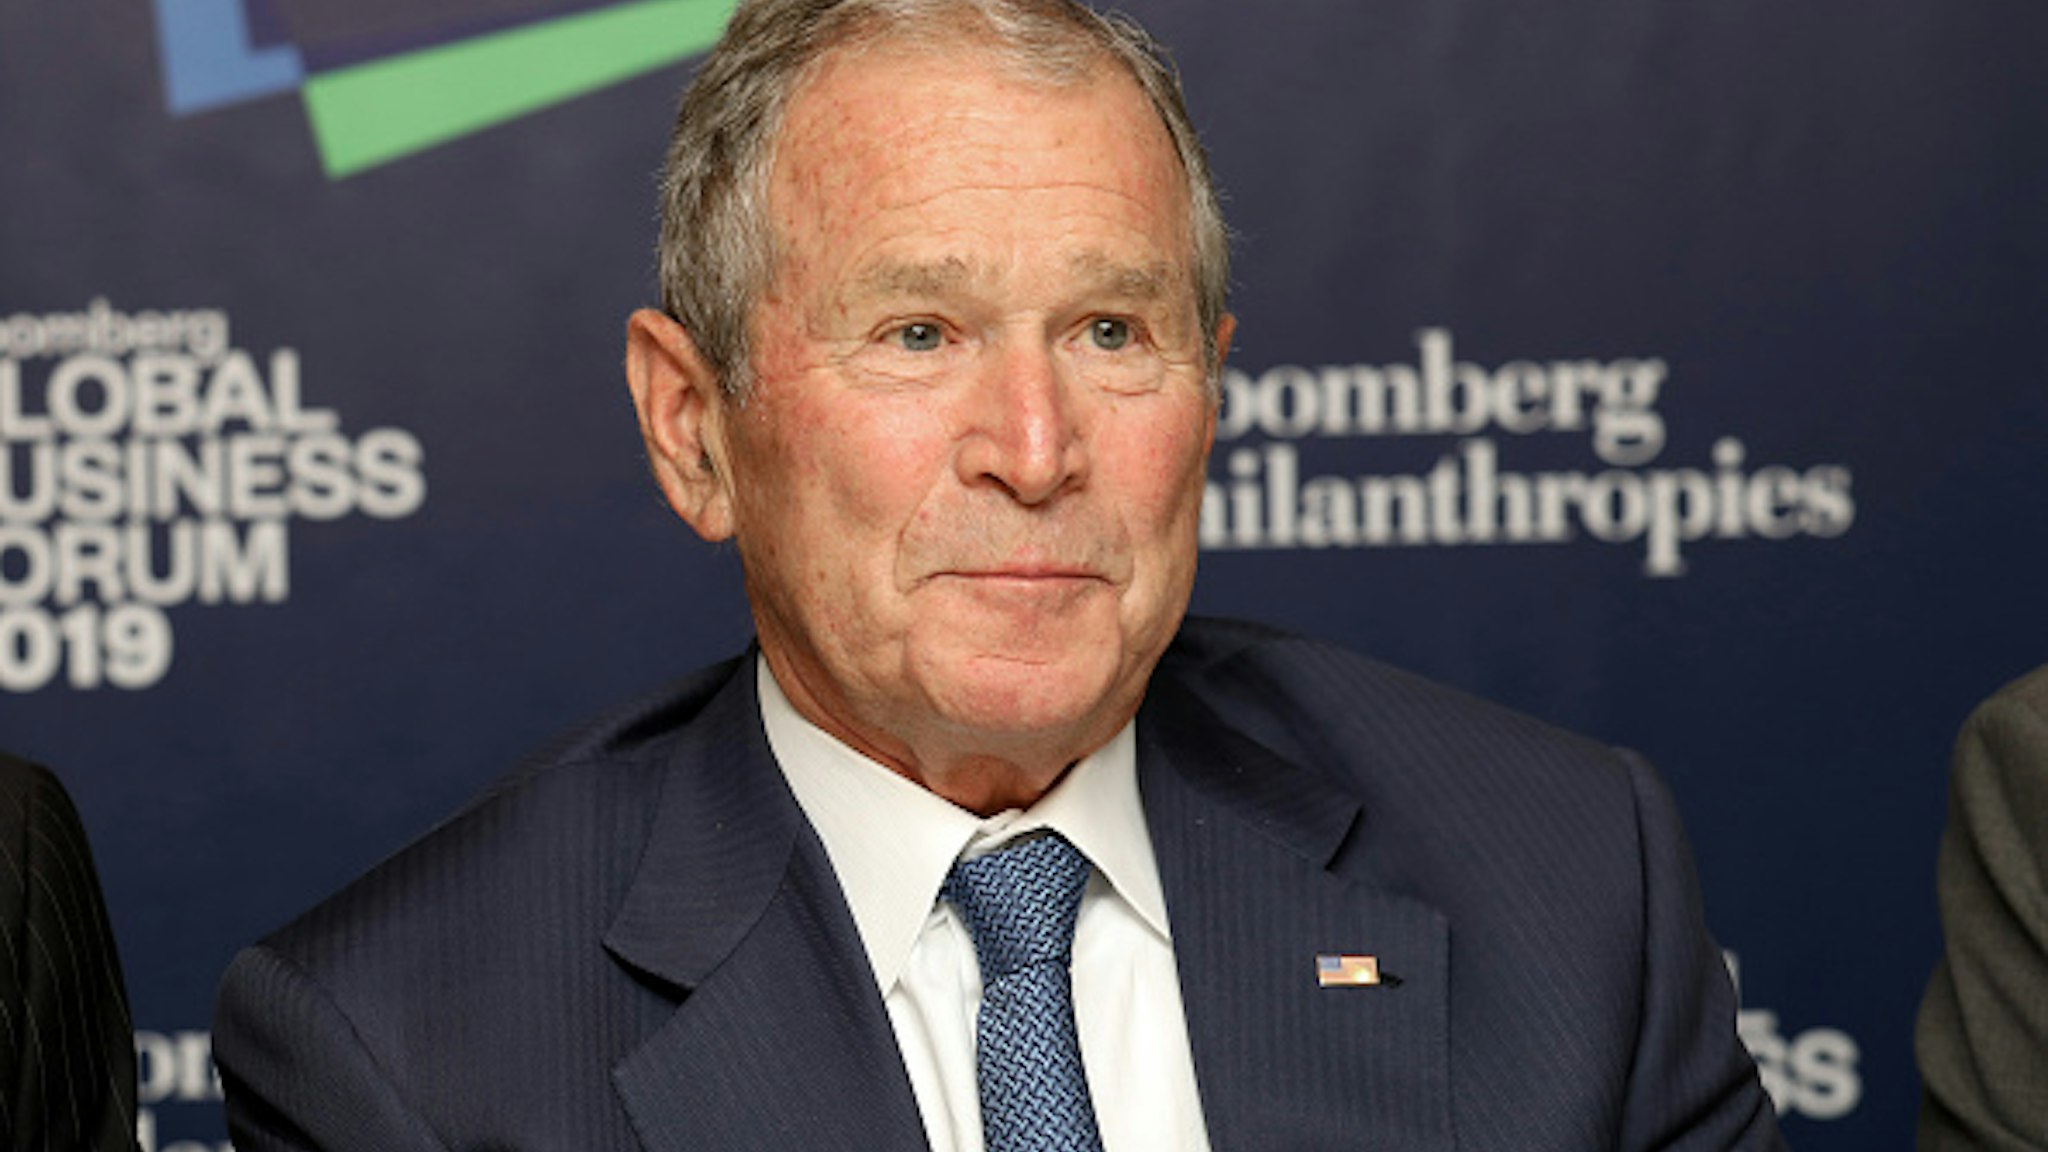 Former U.S. President George W. Bush listens speaking during the Bloomberg Global Business Forum in New York, U.S., on Wednesday, Sept. 25, 2019. The third annual Forum brings together important global leaders from the public and private sectors to address the threats from global warming to economic prosperity and examine the opportunities for solutions.